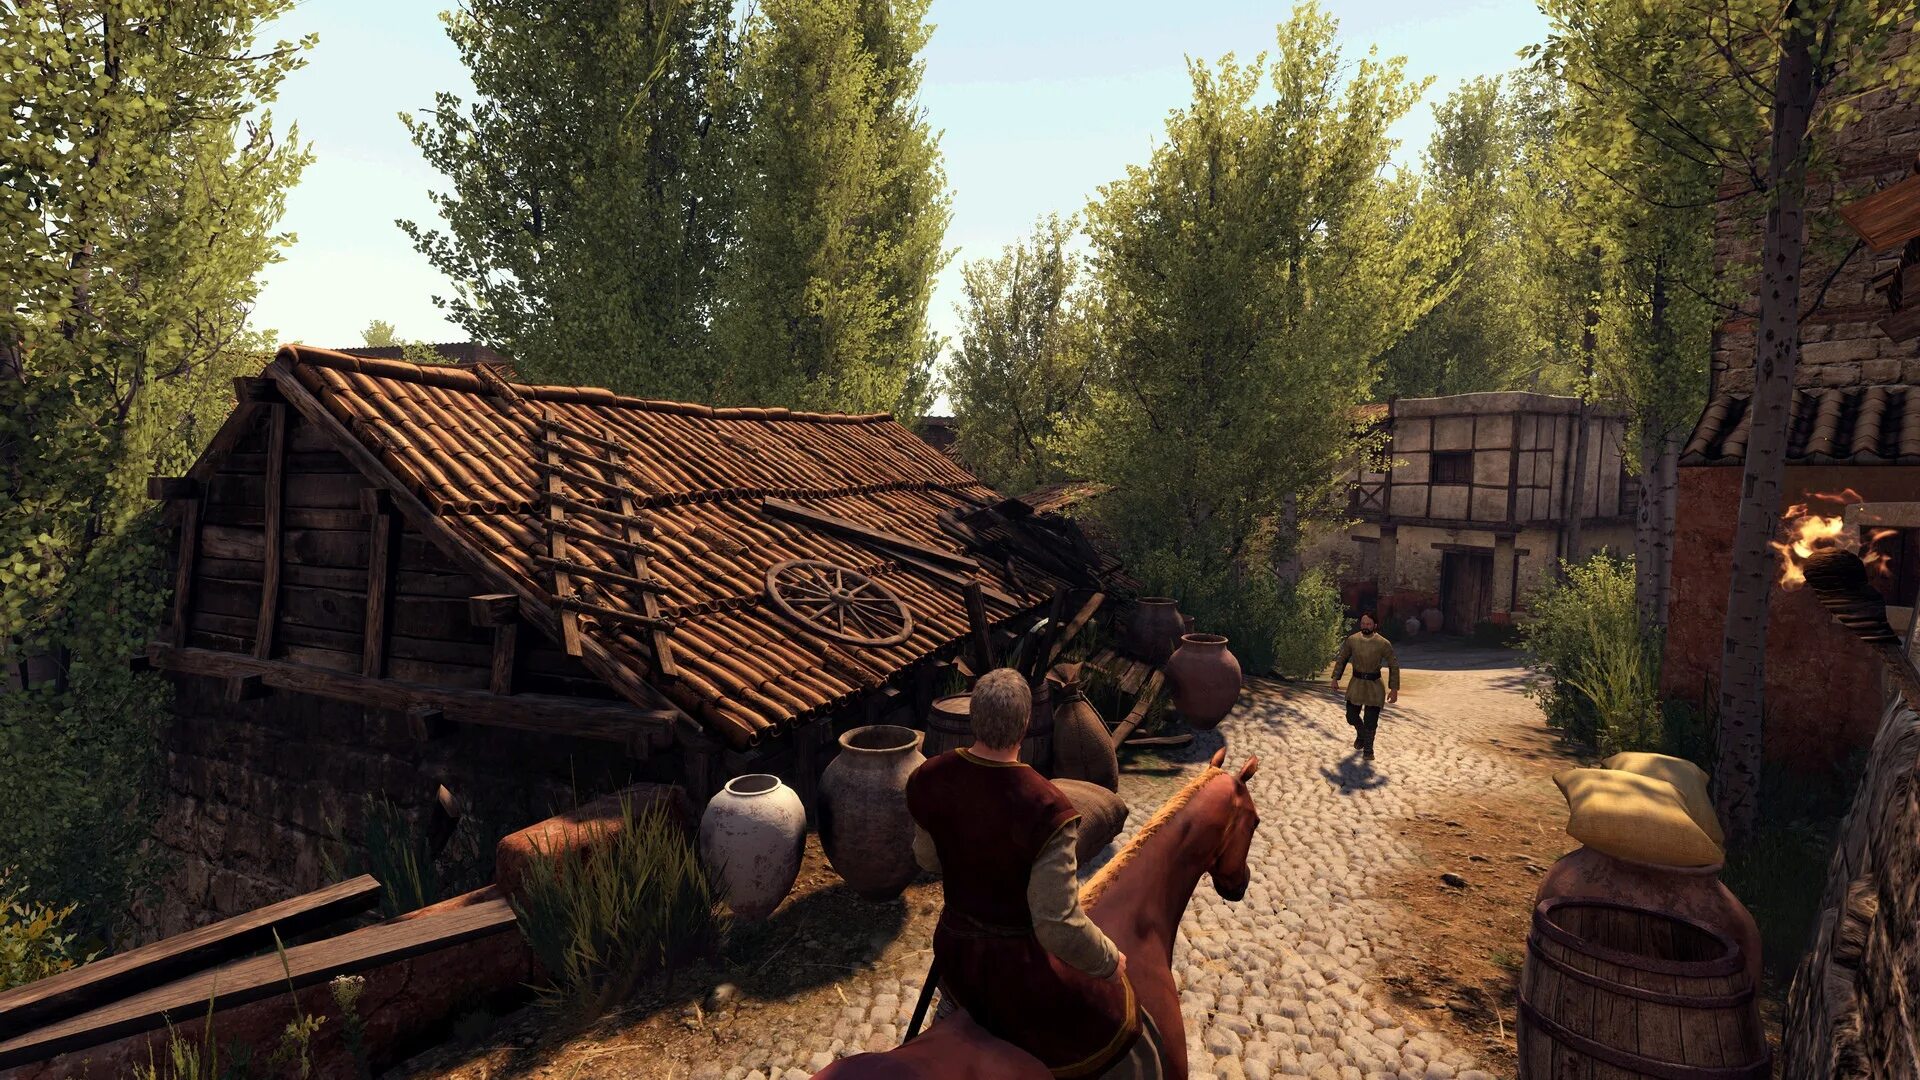 Mount and Blade 2 Bannerlord. Mountain Blade 2 Bannerlord. Mount and Blade 2 Bannerlord screenshot. Mounted Blade 2 Bannerlord. Warband bannerlord